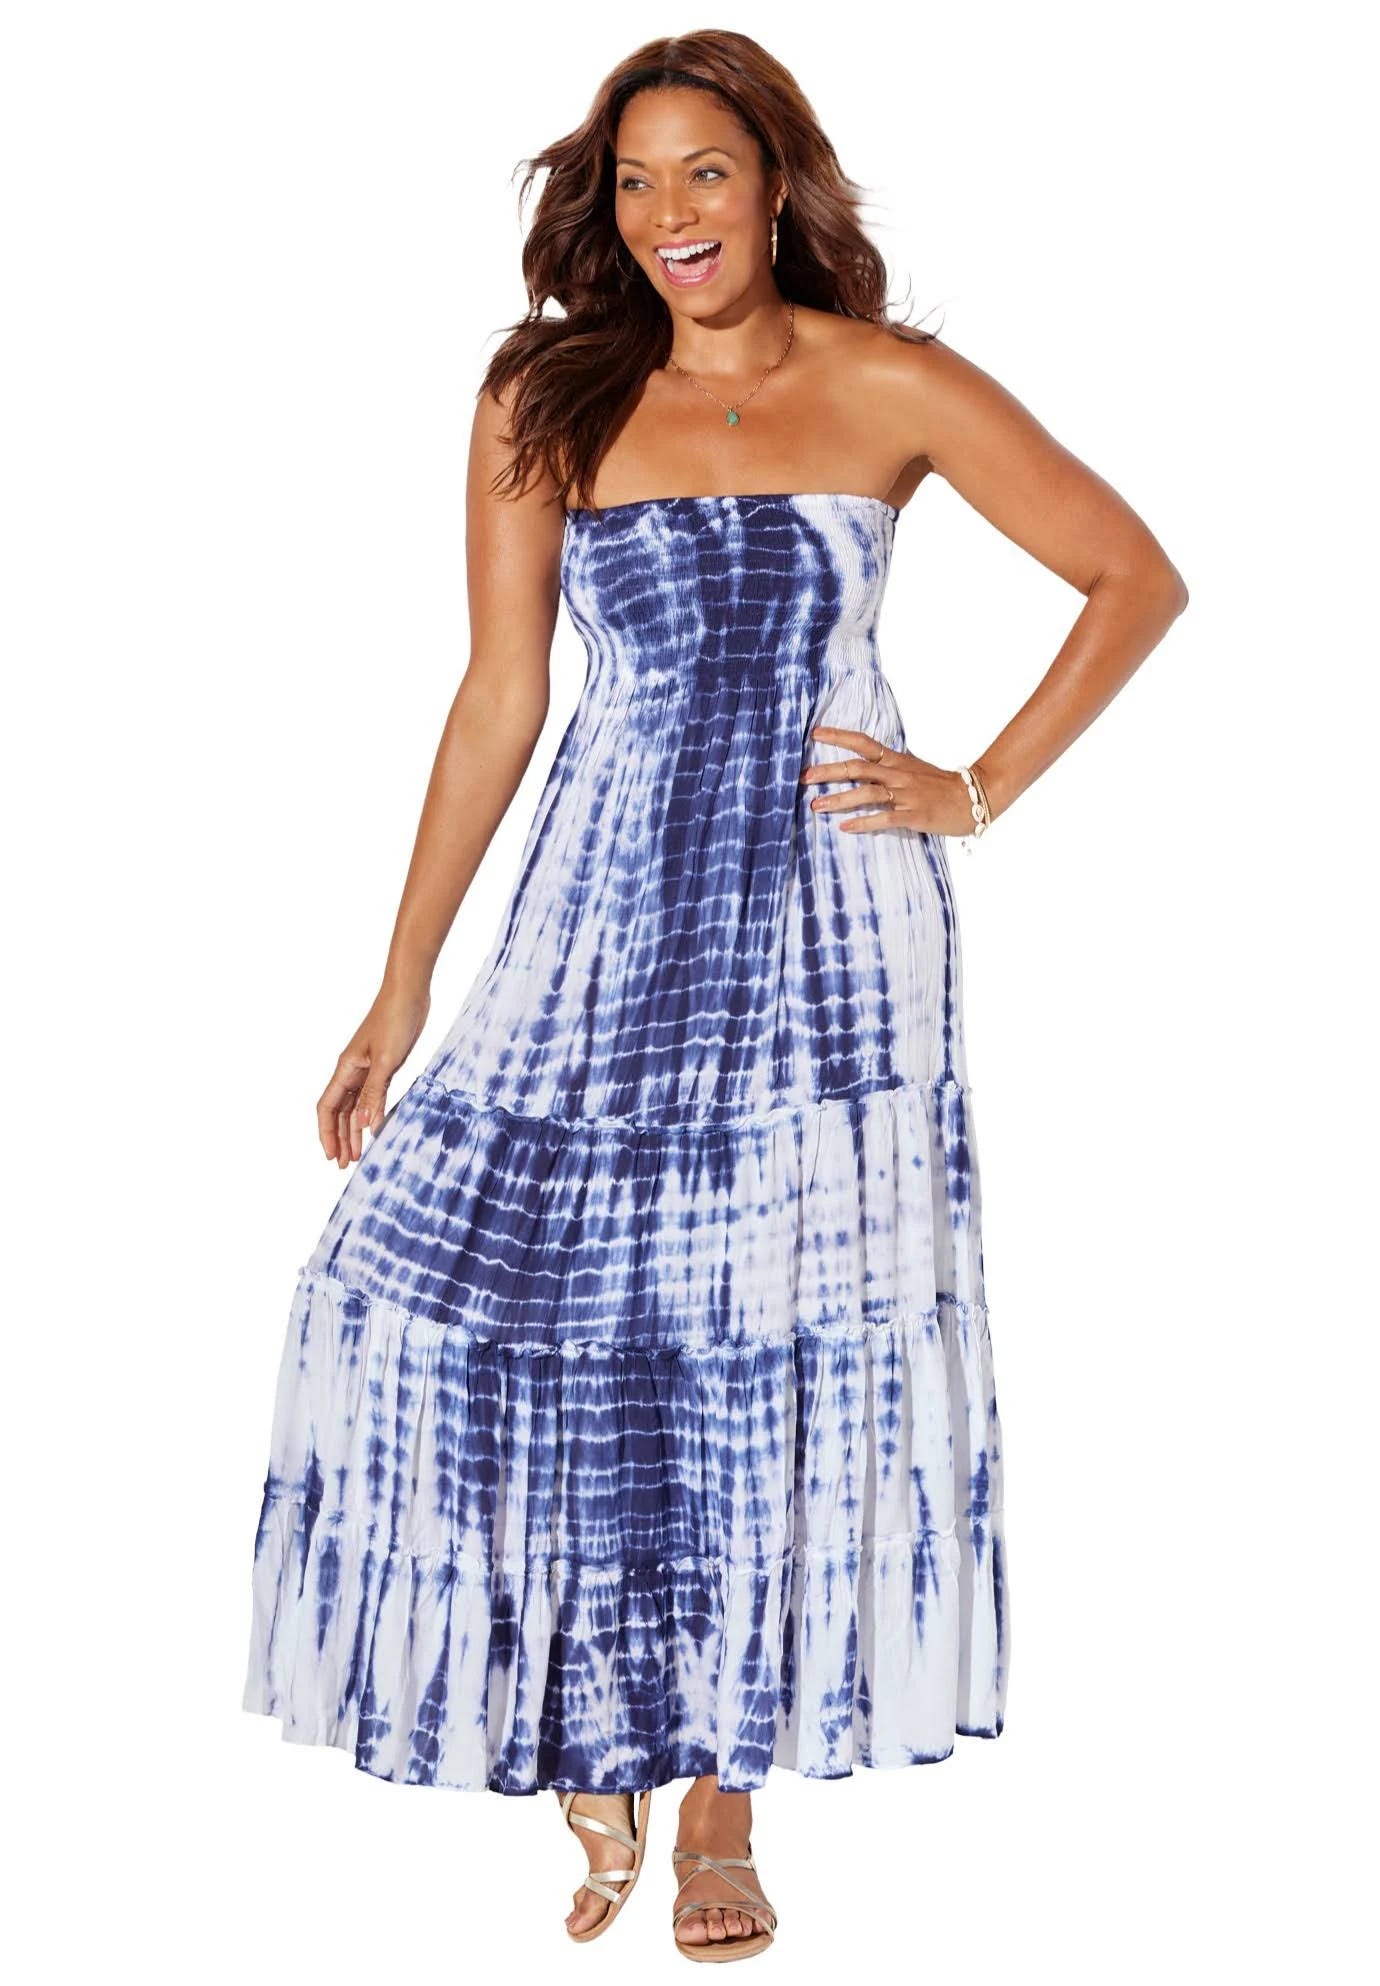 Stylish Maxi Strapless Coverup for Plus Size Women | Image